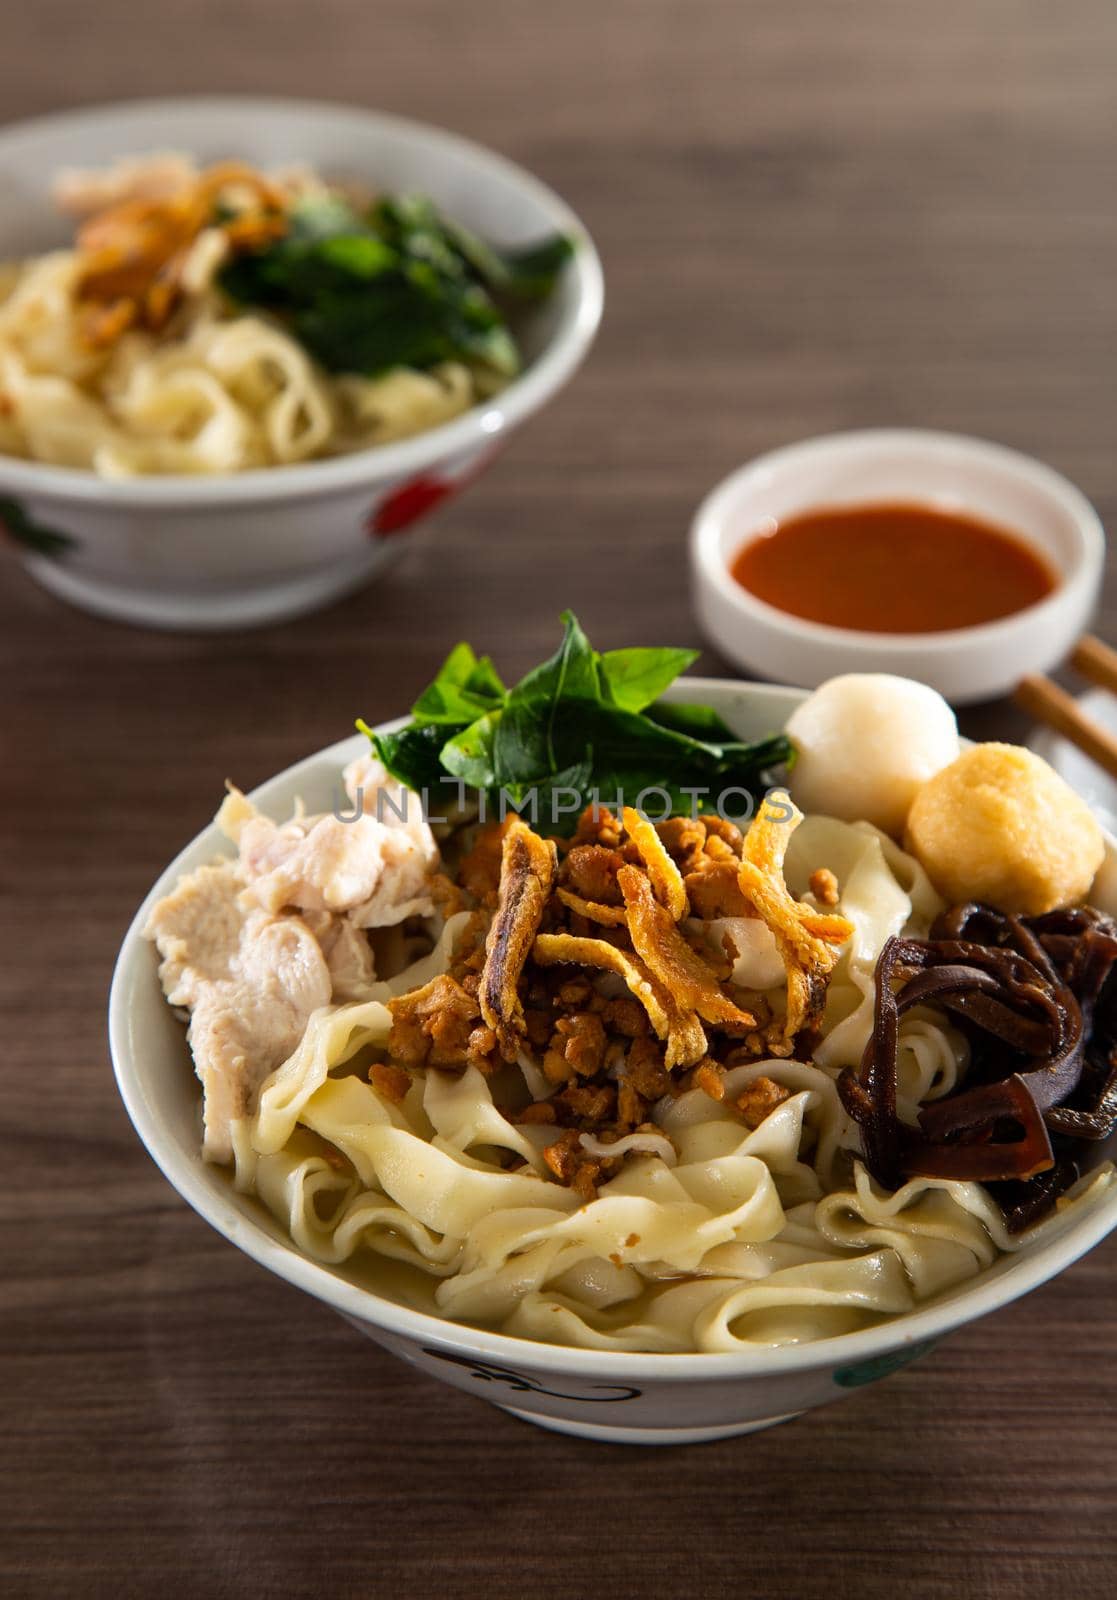 Pan Mee is made with a simple flour-based dough, with anchovy broth, and topped with crispy fried anchovies, ground pork, shiitake mushrooms, and some vegetables.